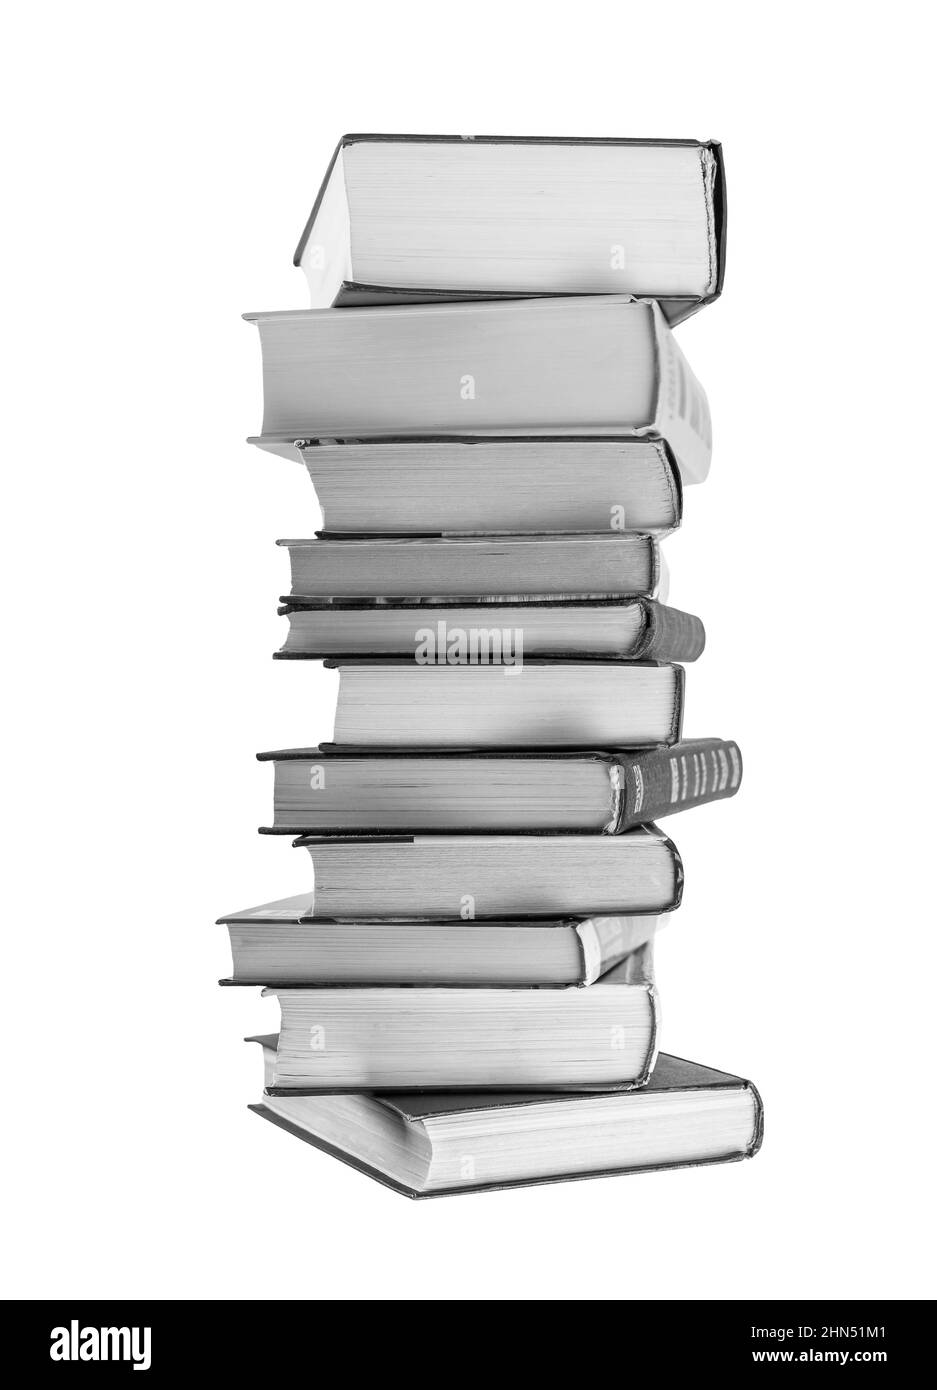 High books stack isolated on white background. Preparing for exams, writing dissertation, study concept. High quality photo Stock Photo